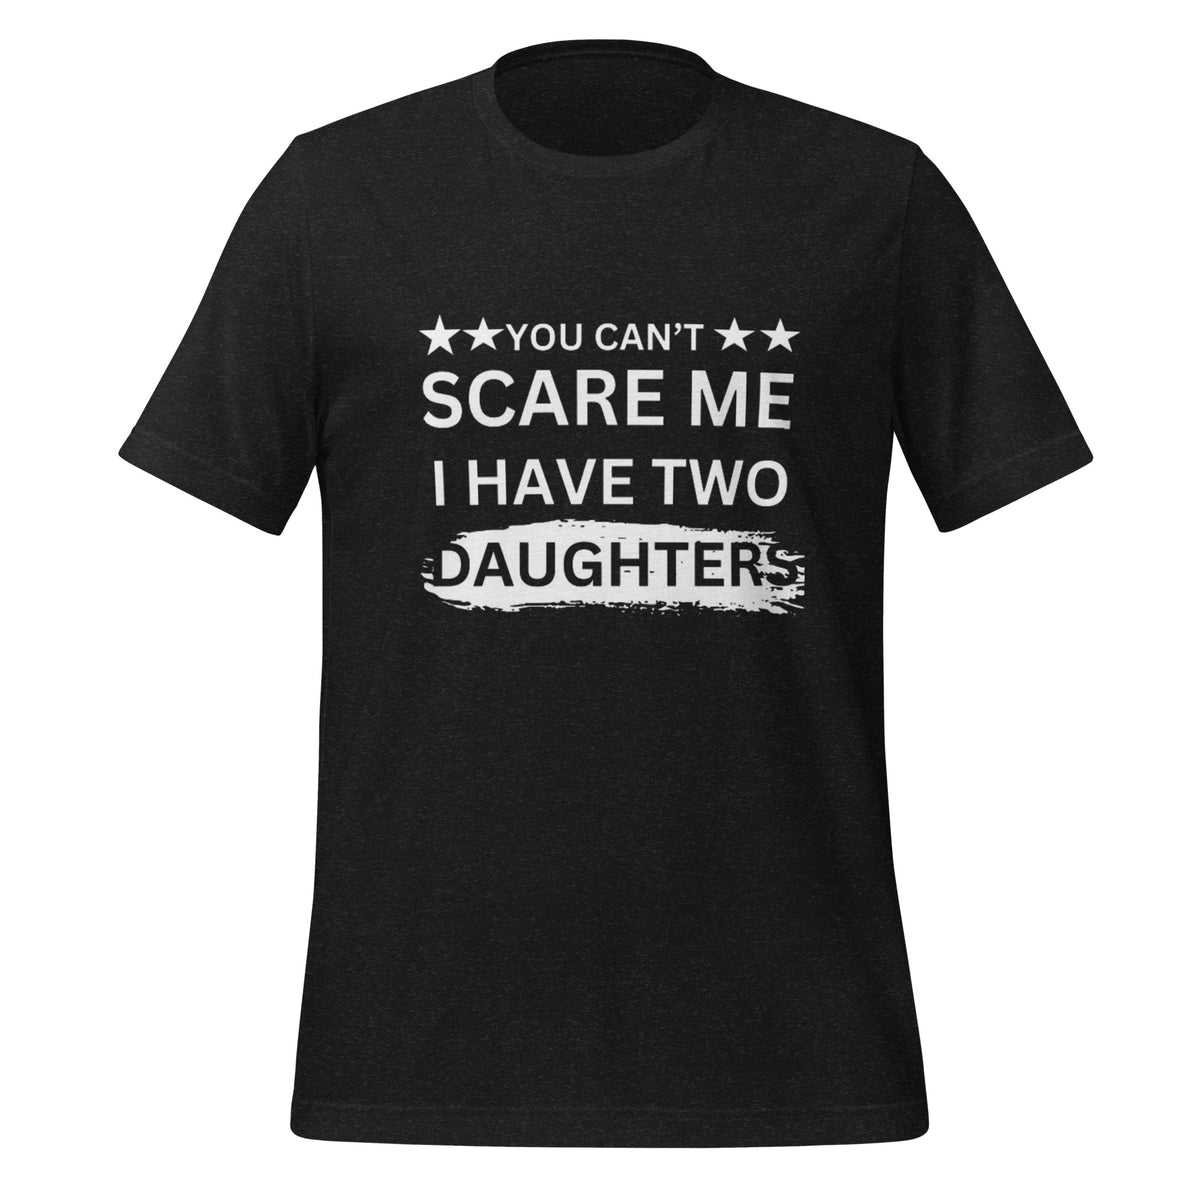 UNISEX T-SHIRT - YOU CAN'T SCARE ME I HAVE TWO DAUGHTERS